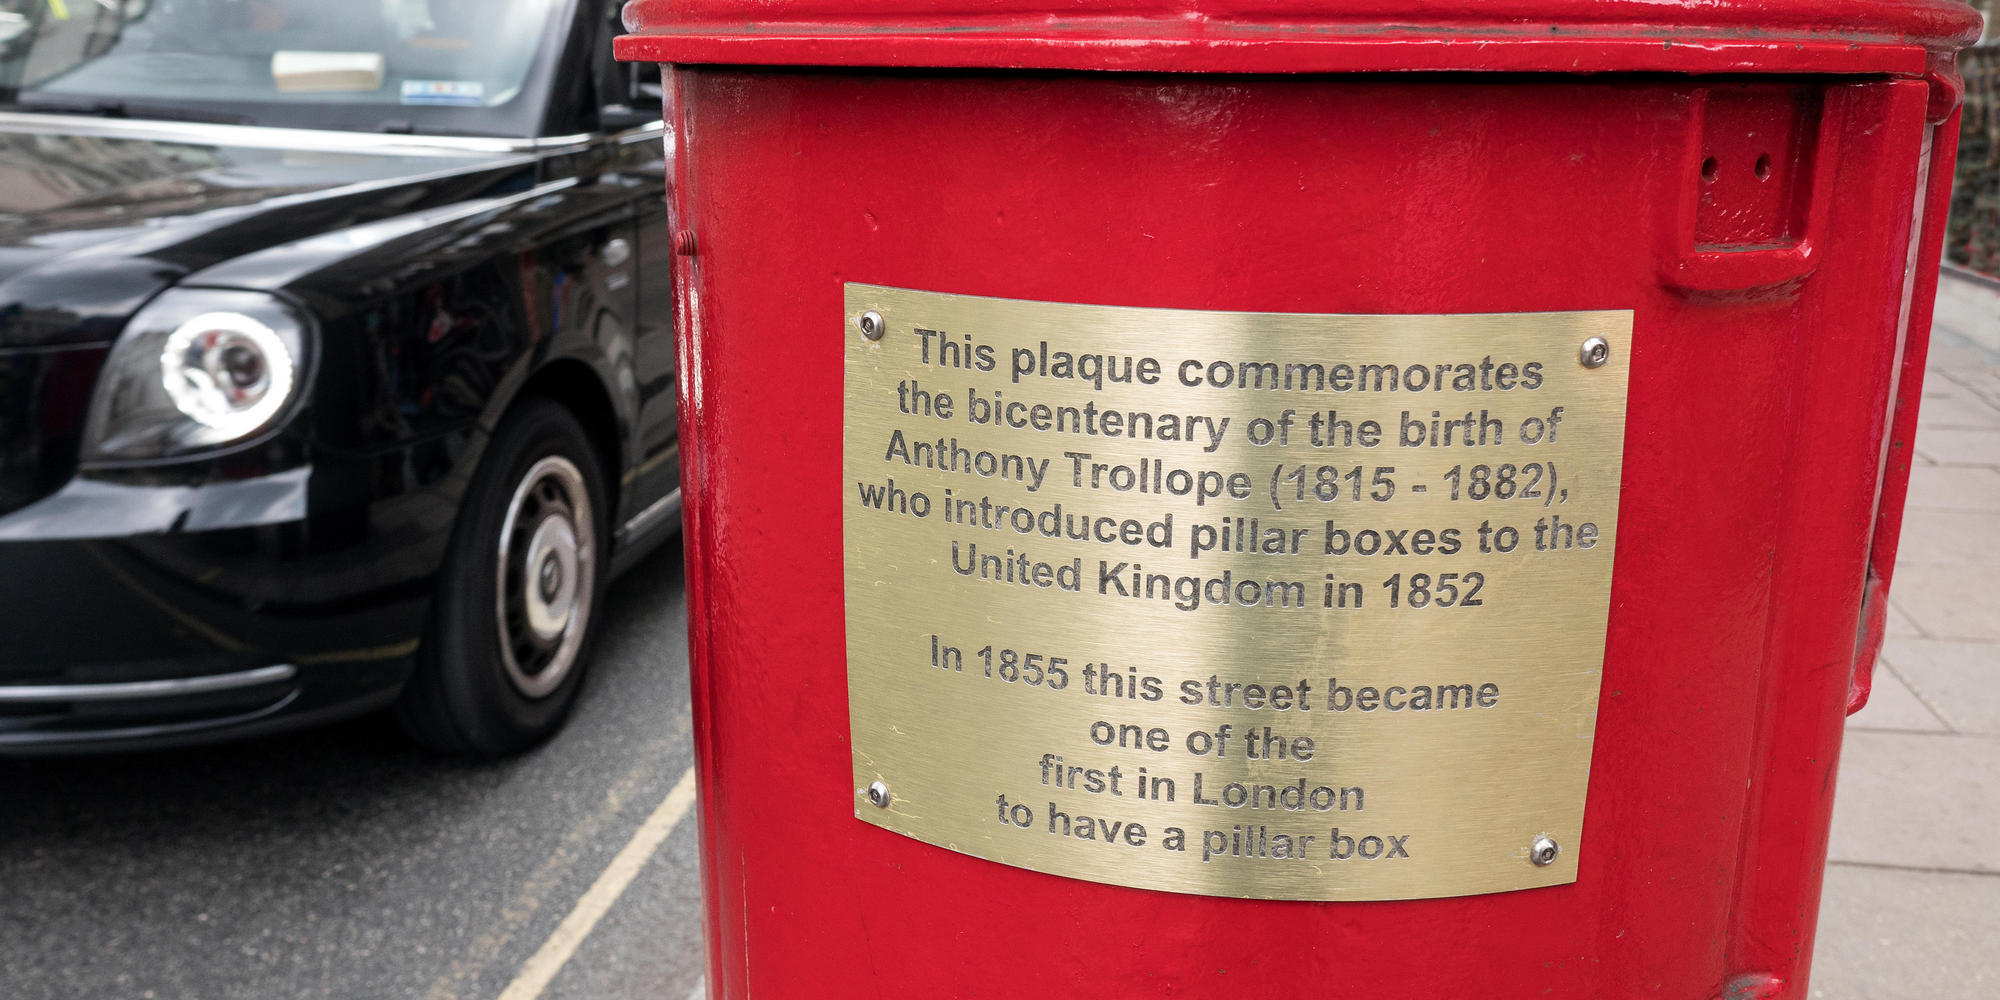 A plaque that commemorates the introduction of the pillar box by Anthony Trollope in 1852 Piccadilly London UK